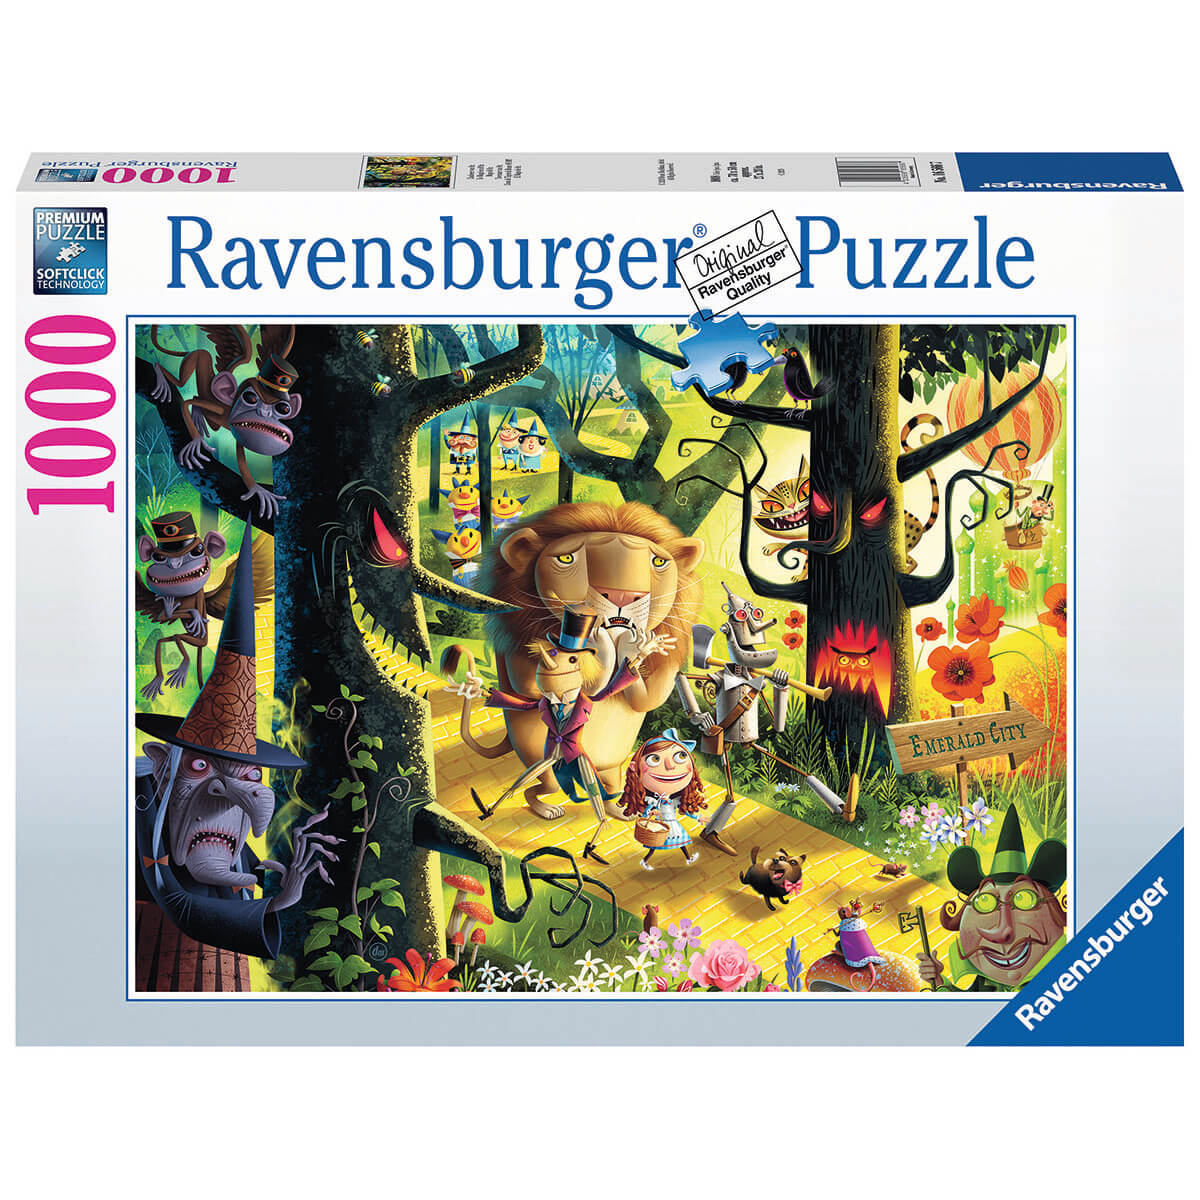 Ravensburger Lions, Tigers & Bears, Oh My! 1000 Piece Puzzle